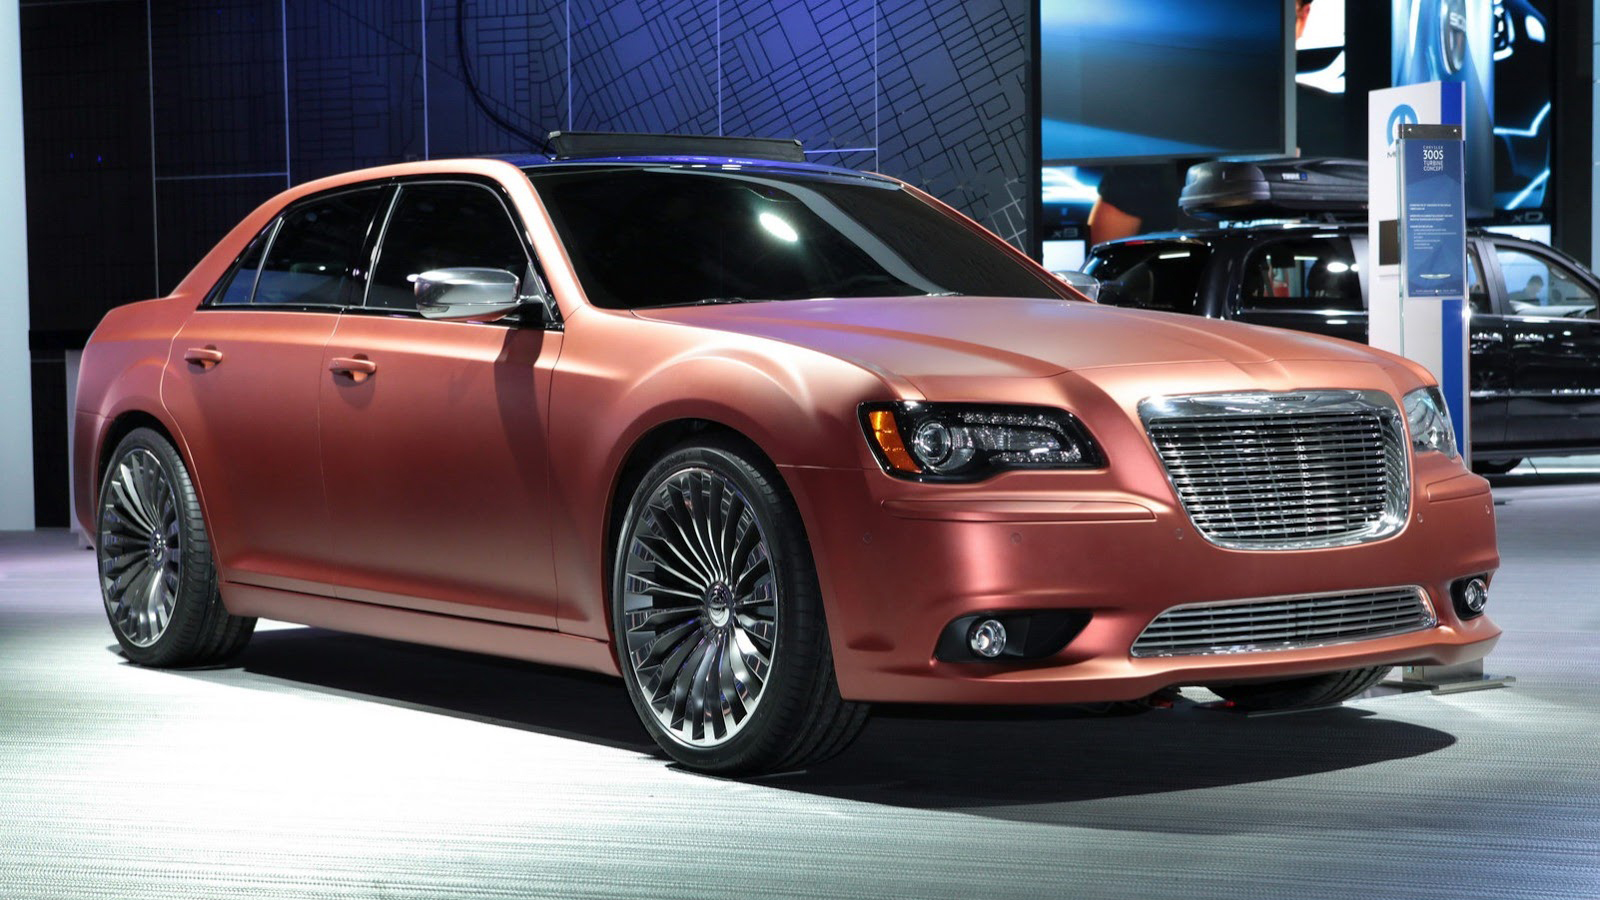 Car Wallpapers in Good Images 2013 Chrysler 300 Turbine